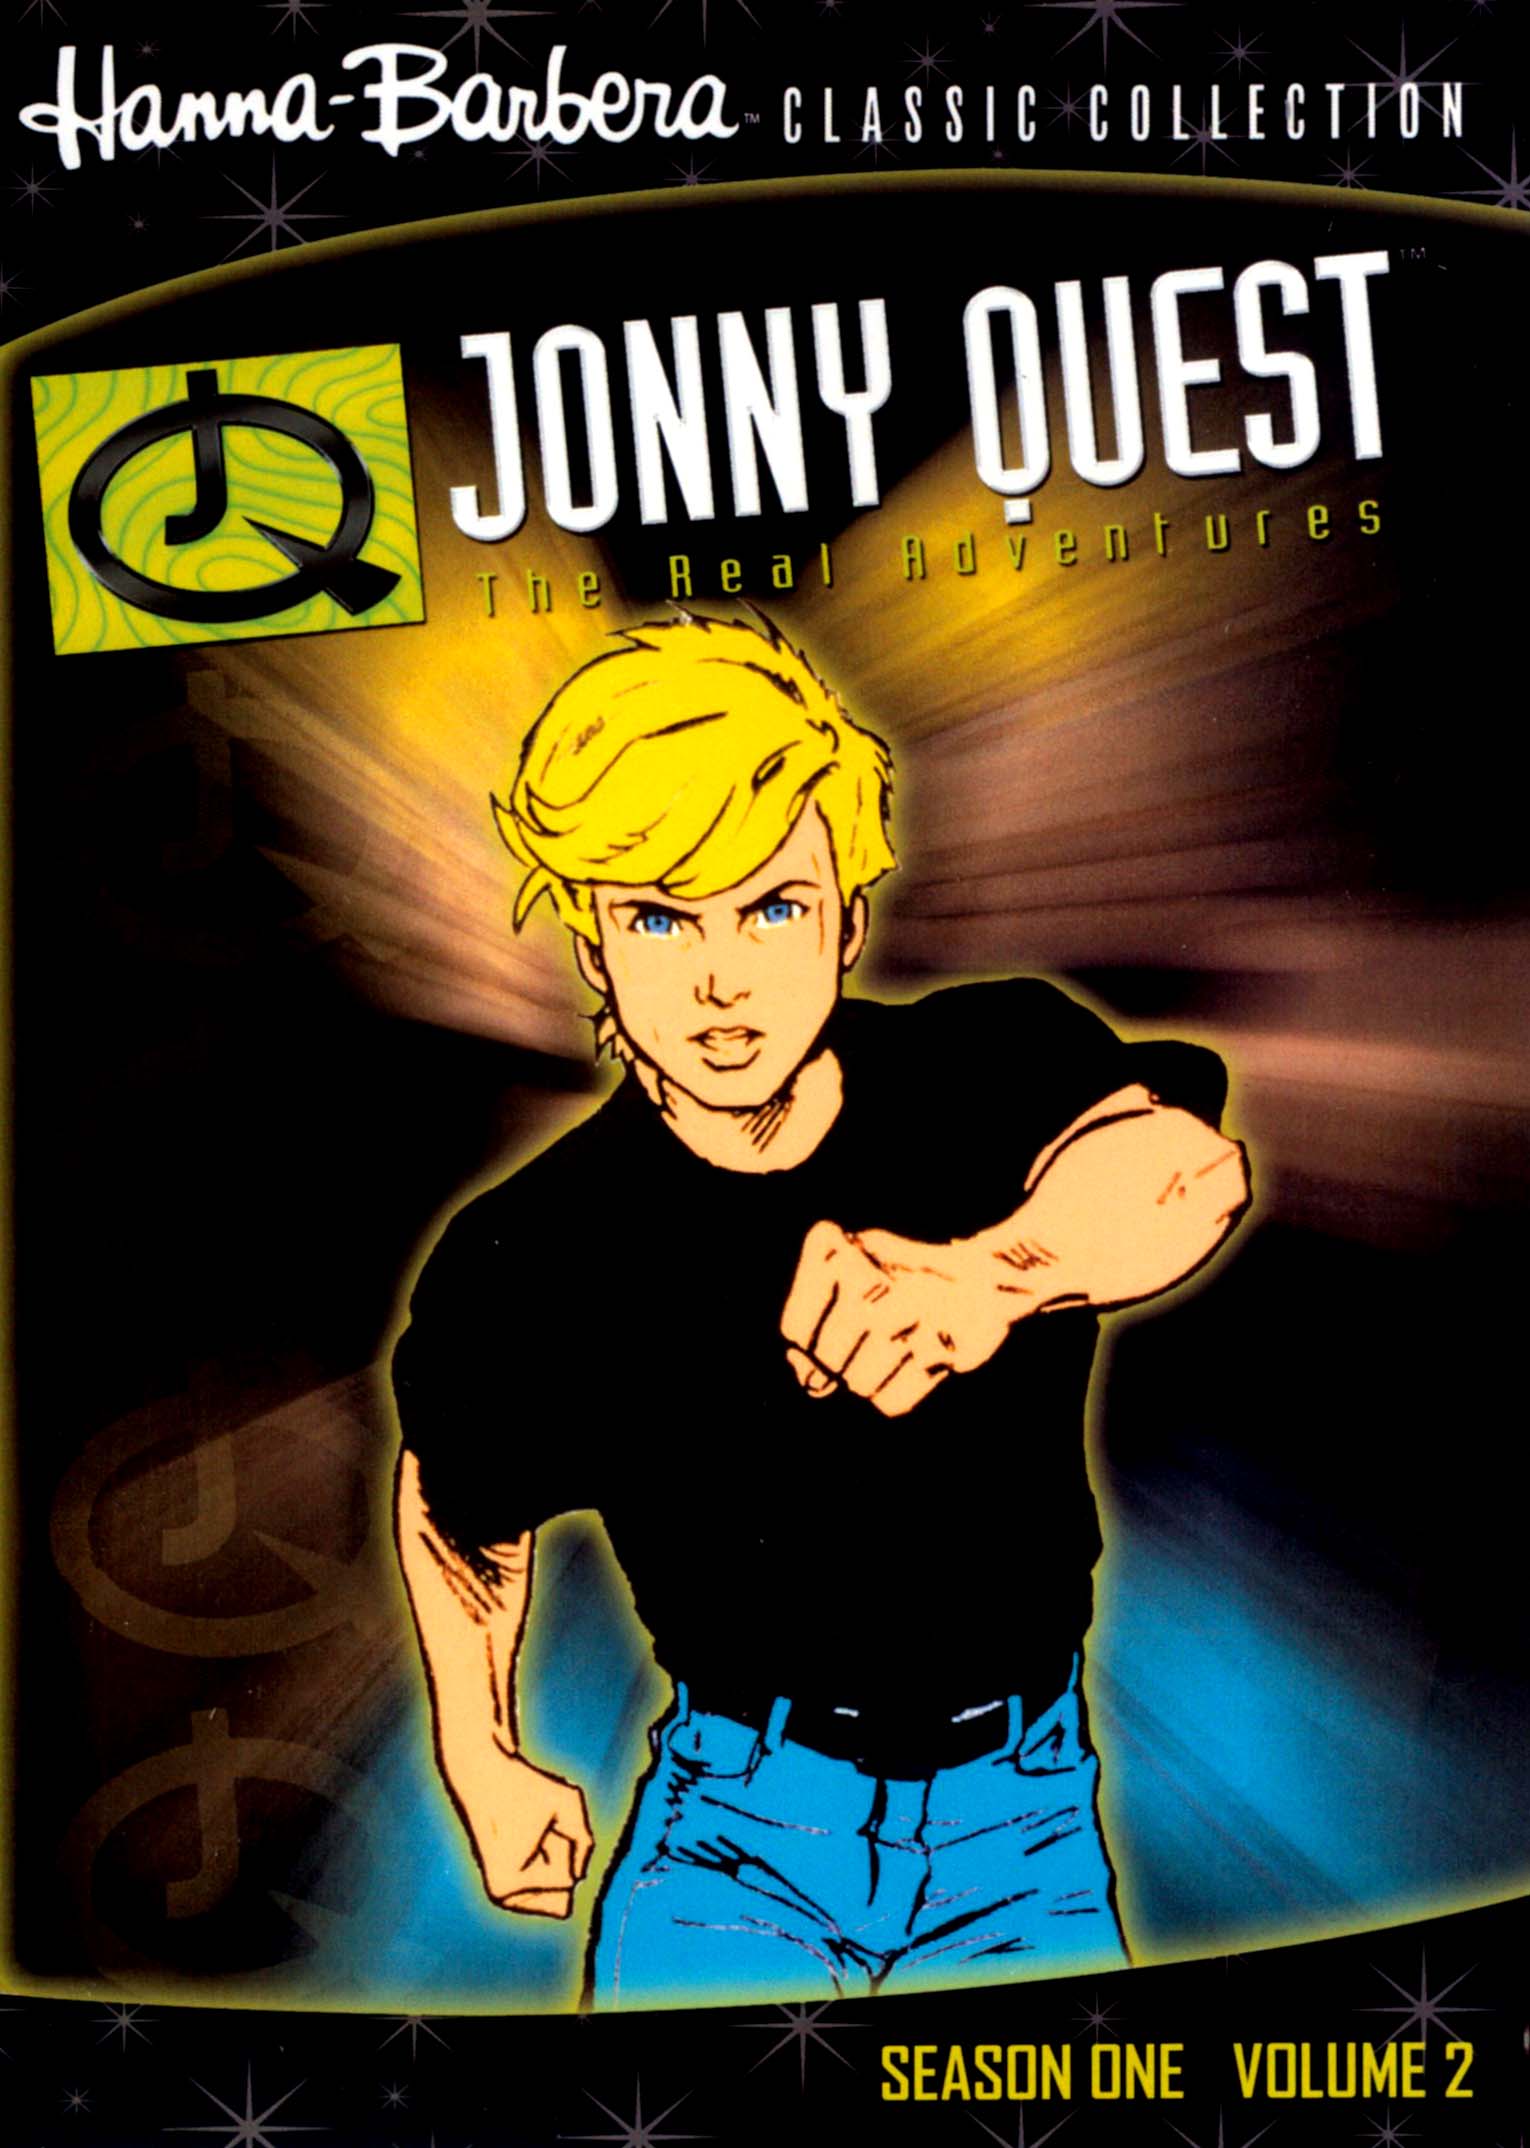 What do you think of The Real Adventures Of Jonny Quest? : r